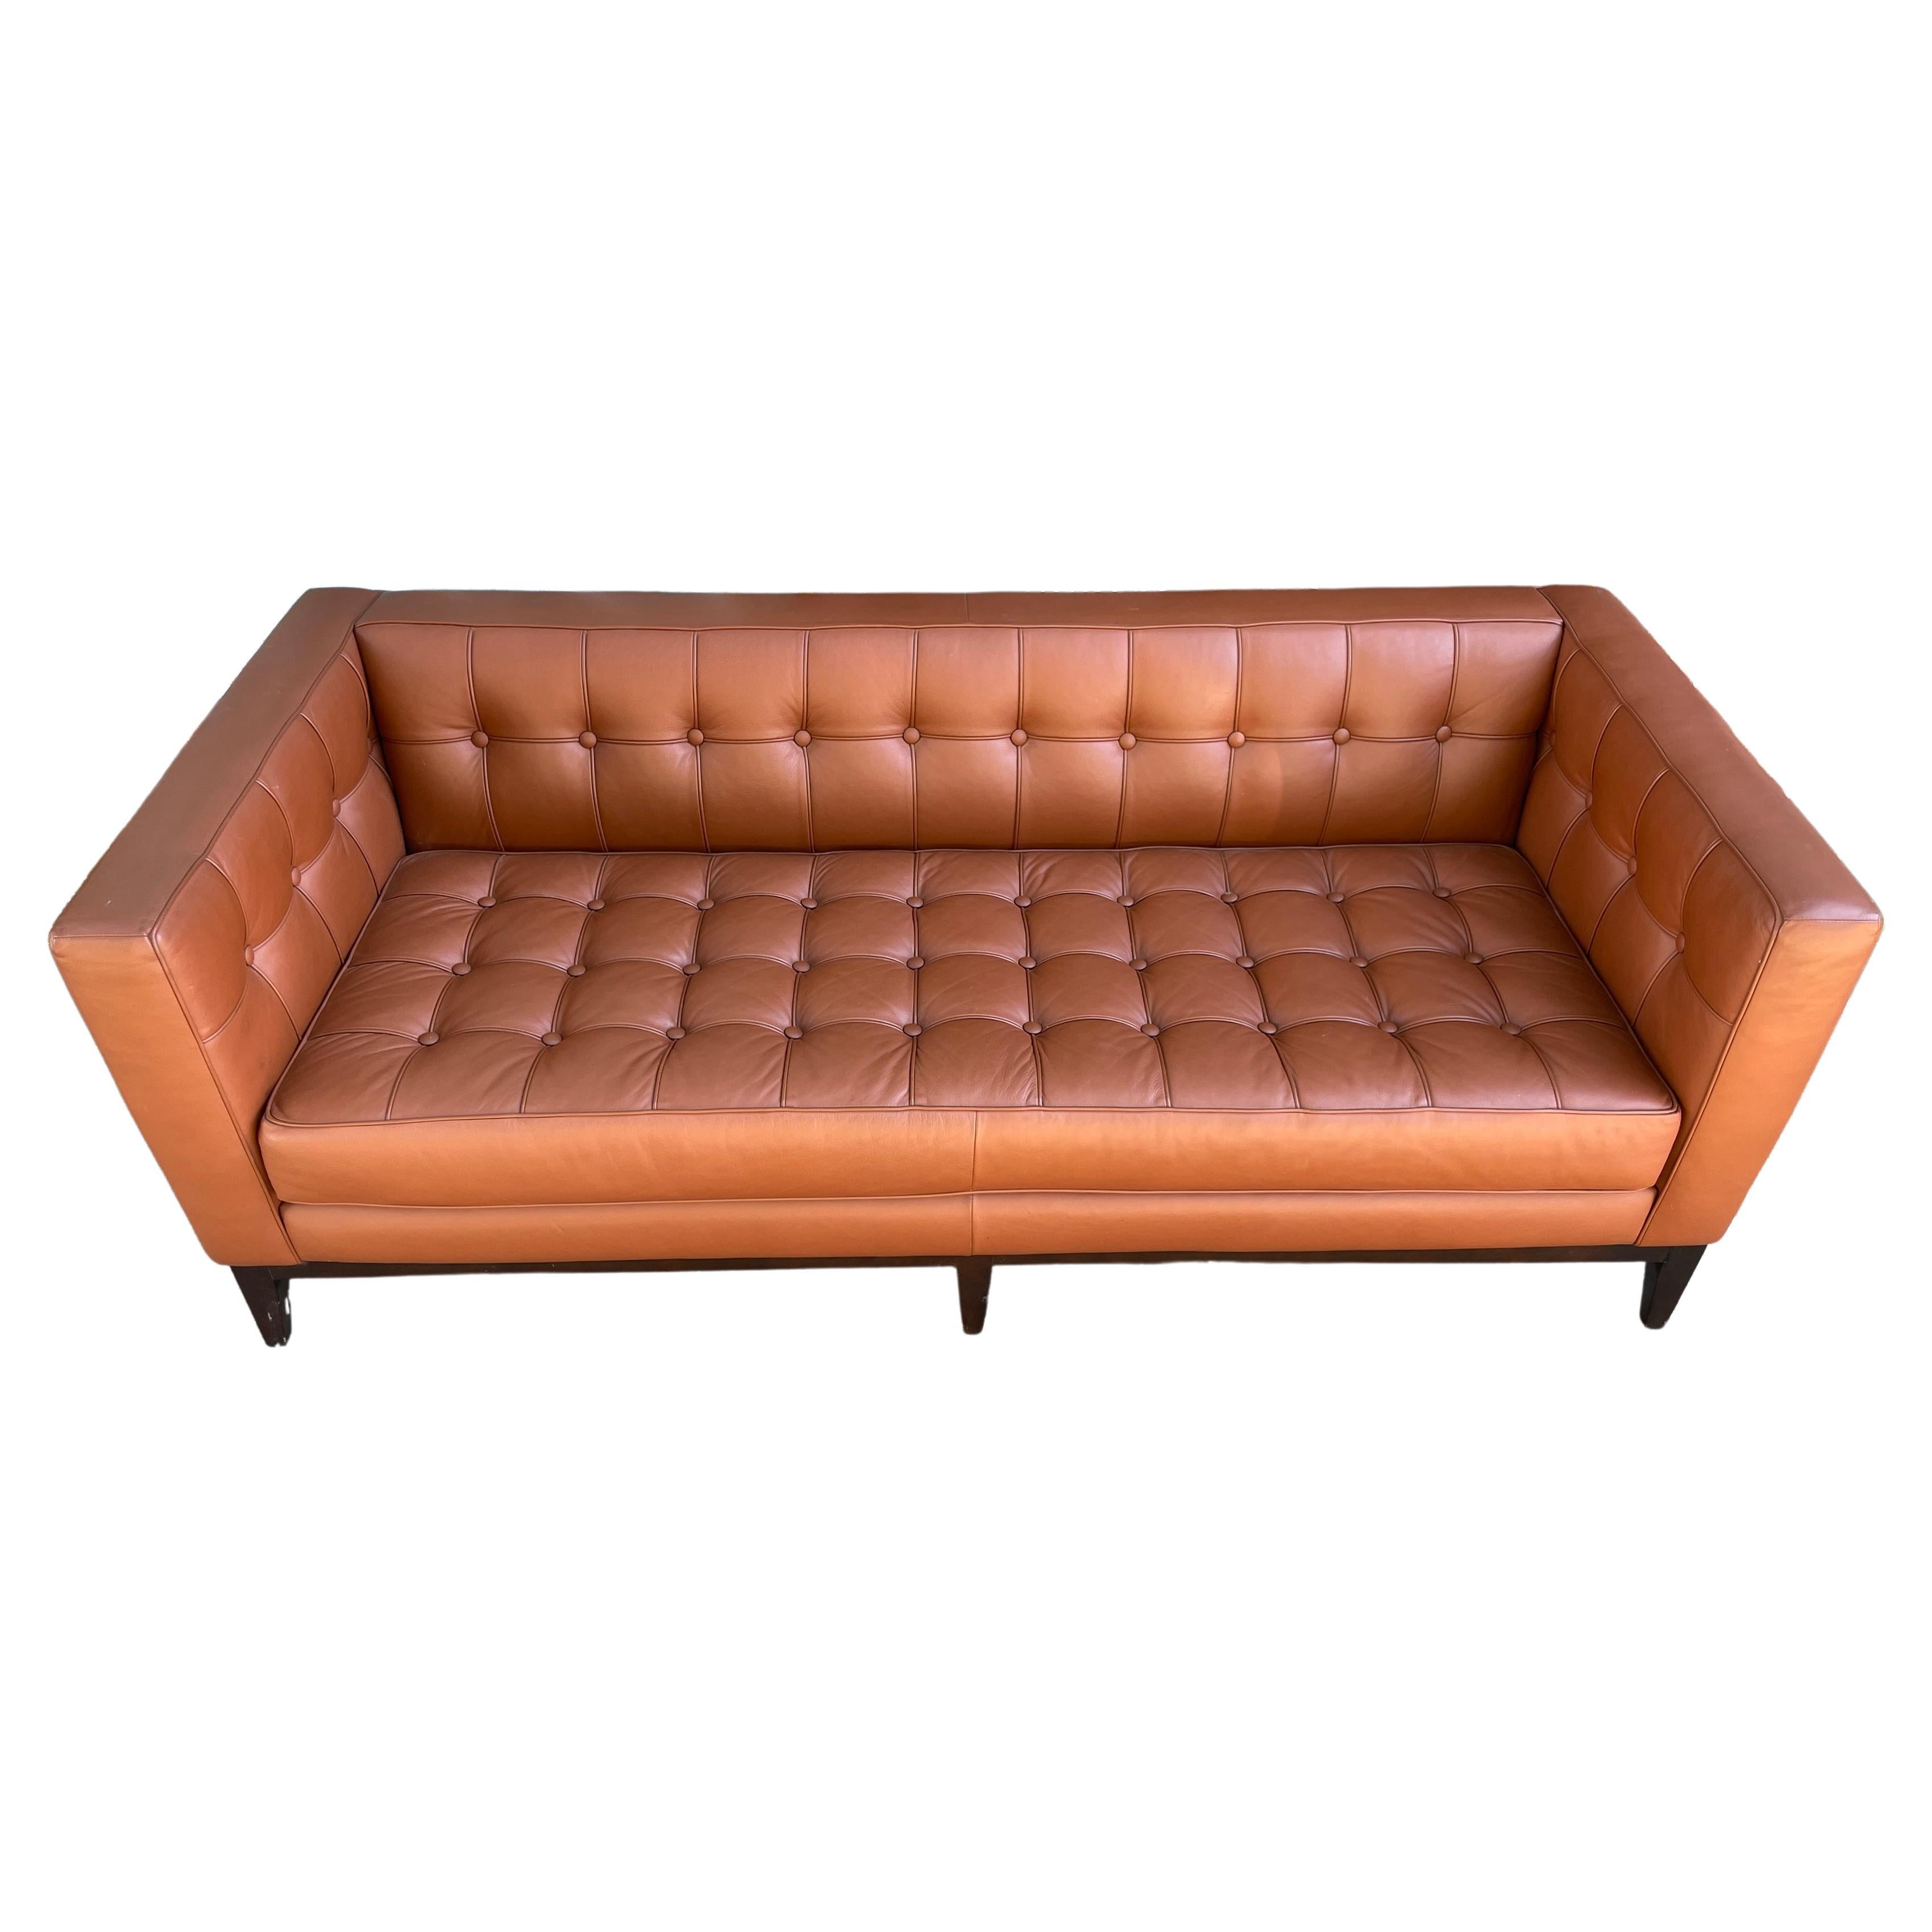 Beautiful Mid-Century Modern style luxe Cognac Brown tufted sofa by American Leather company for Jensen Lewis NYC. Very High Quality Leather soft and comfortable Great Modern Design. Available In Brooklyn NYC.

Measures: 74” L x 33” D x 27” H - SH